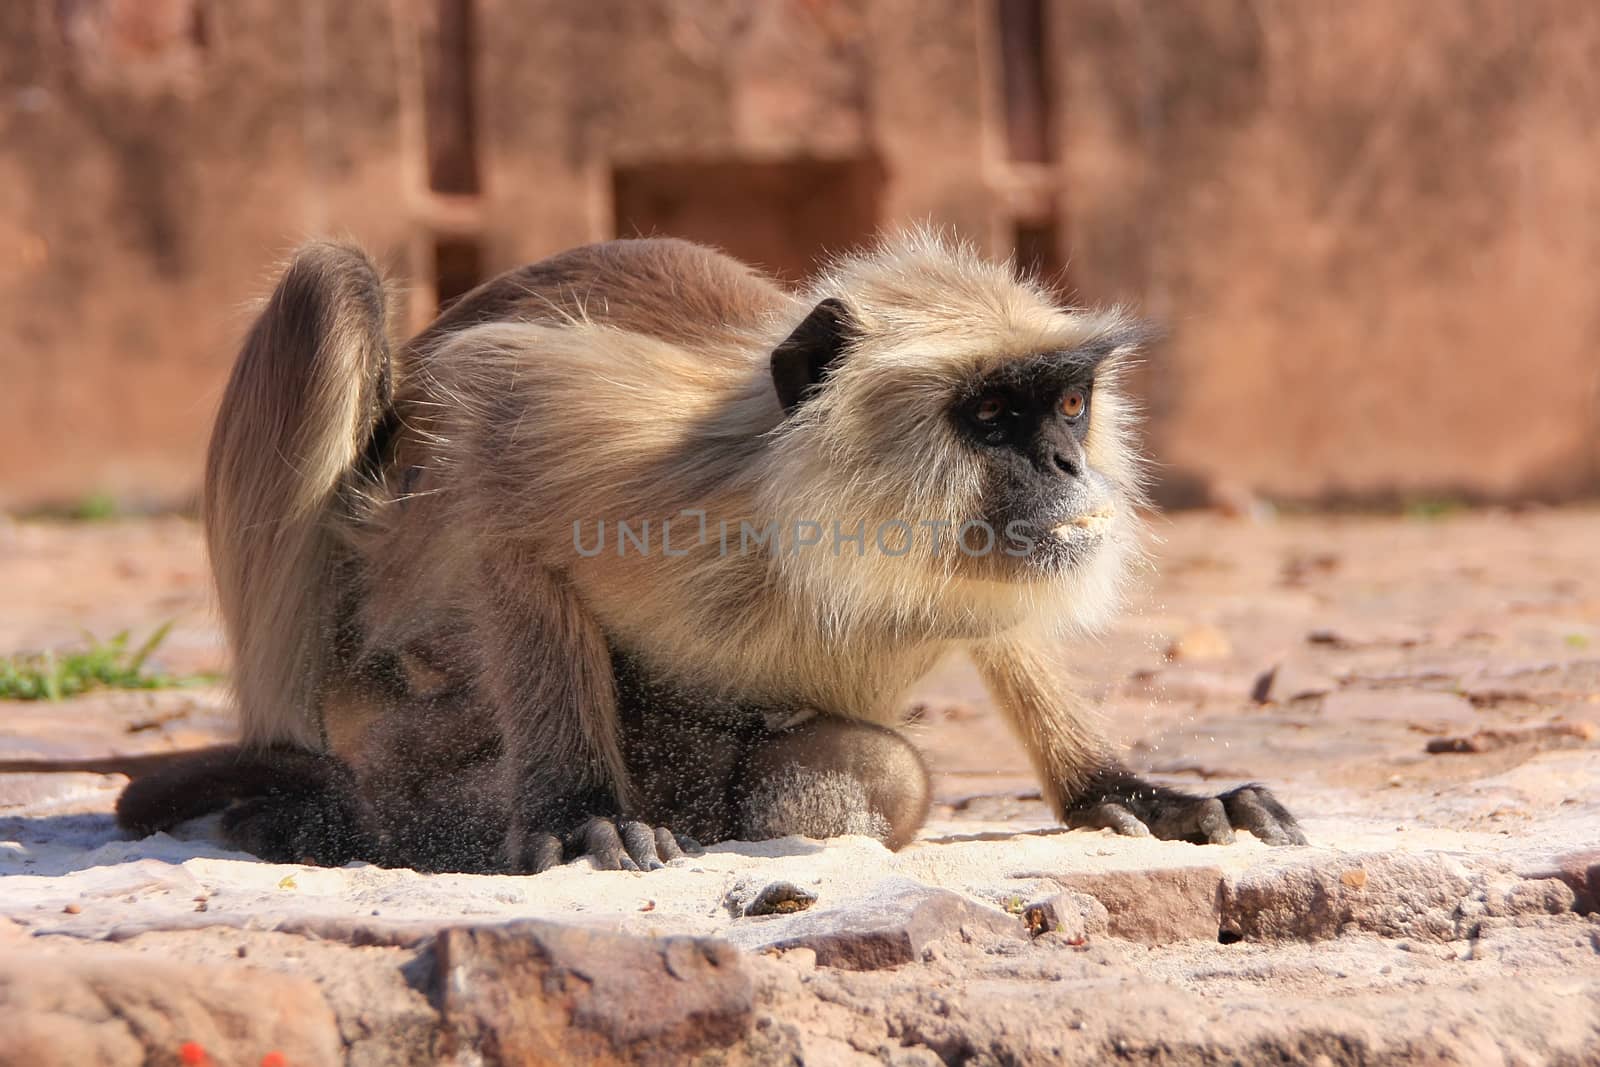 Gray langur (Semnopithecus dussumieri) with a baby eating at Ranthambore Fort, Rajasthan, India